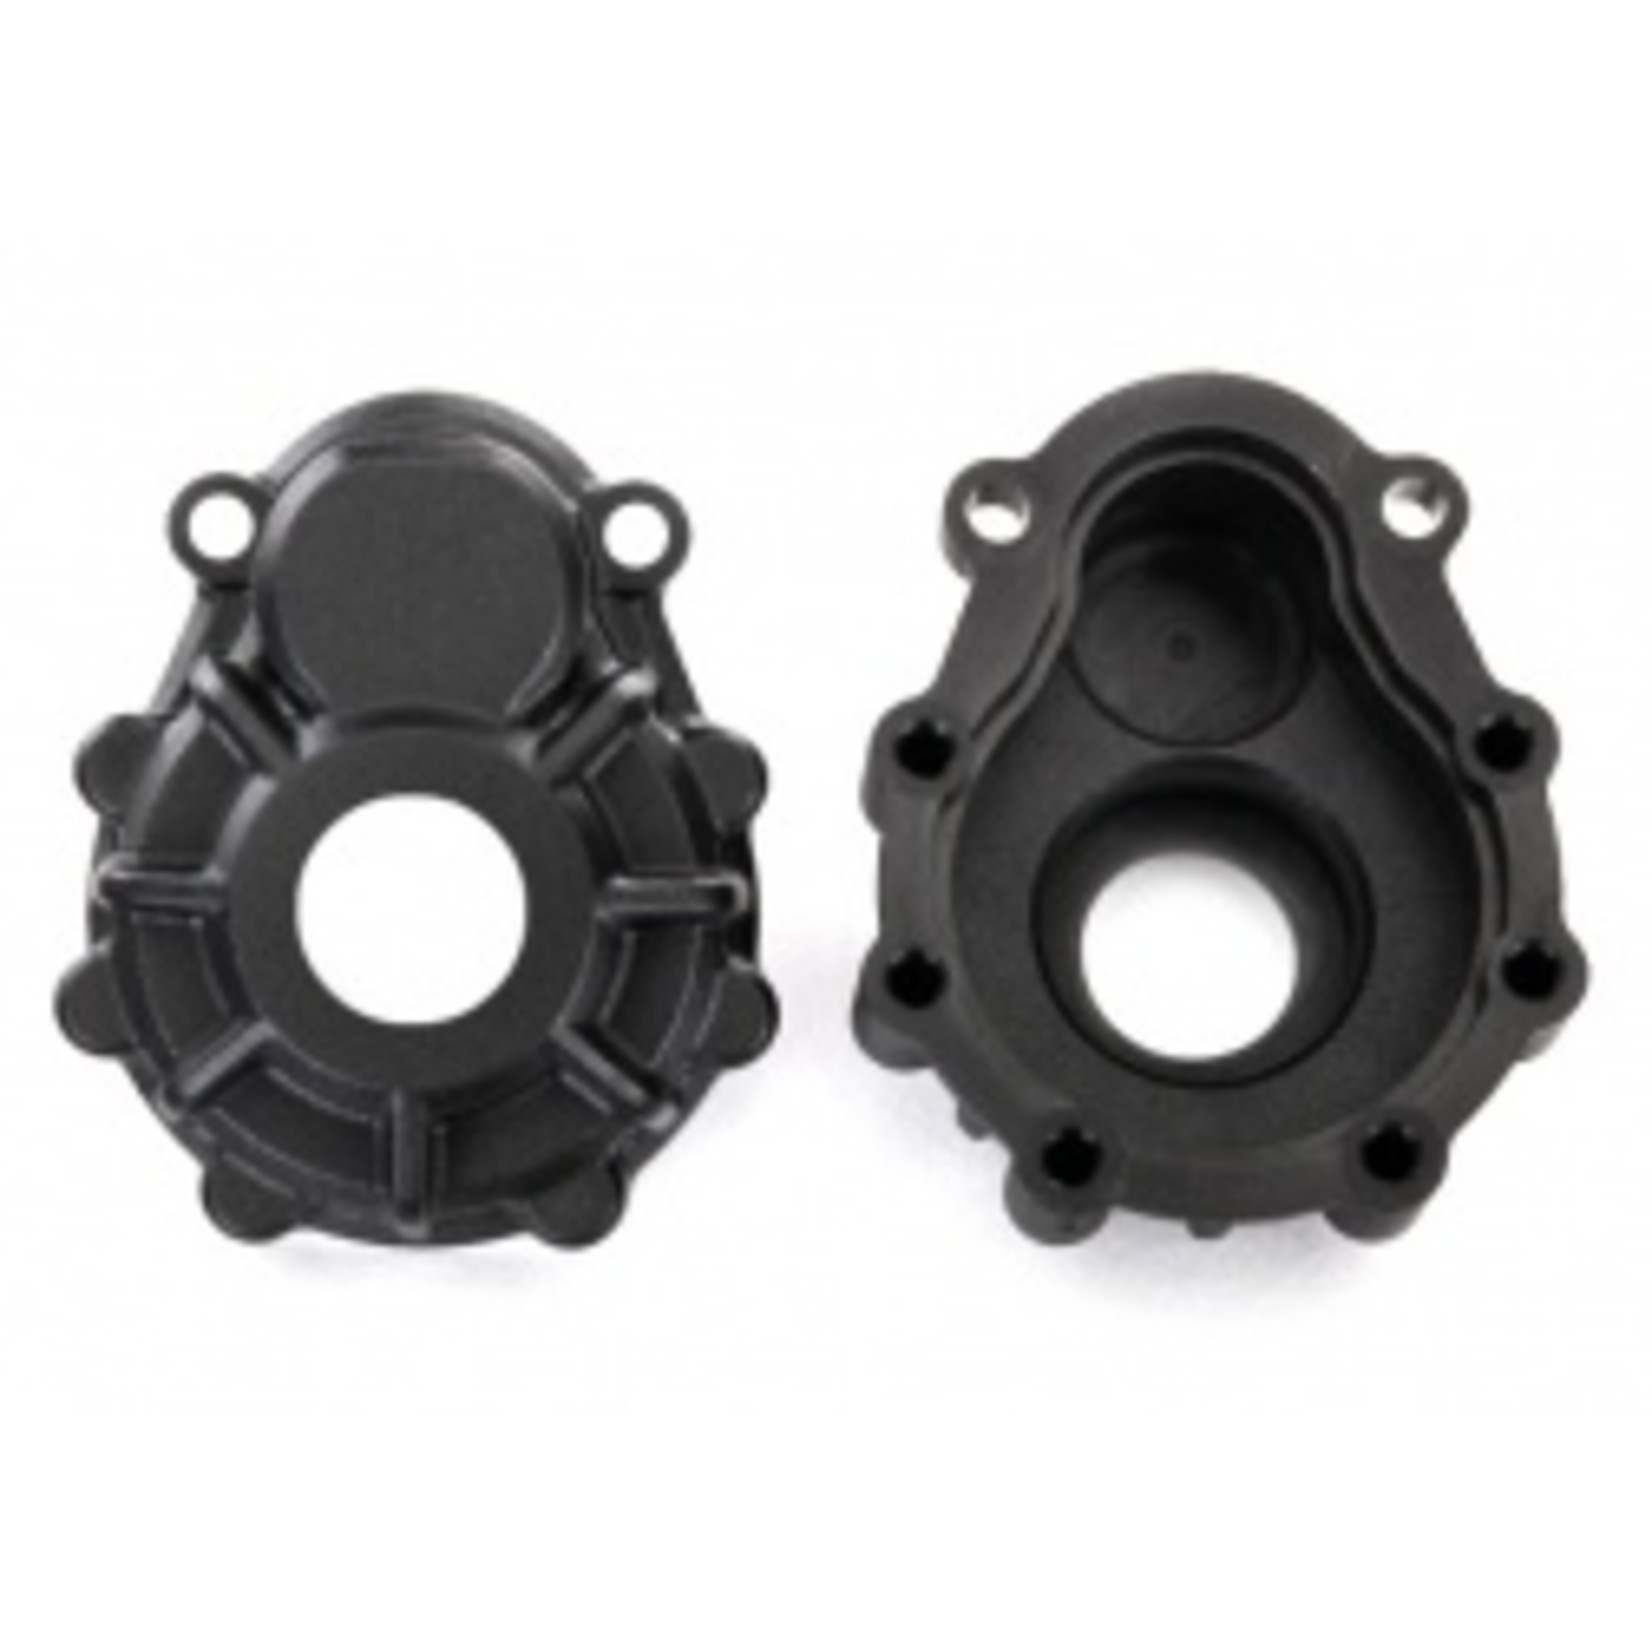 Traxxas Portal drive housing, outer (front or rear) (2)